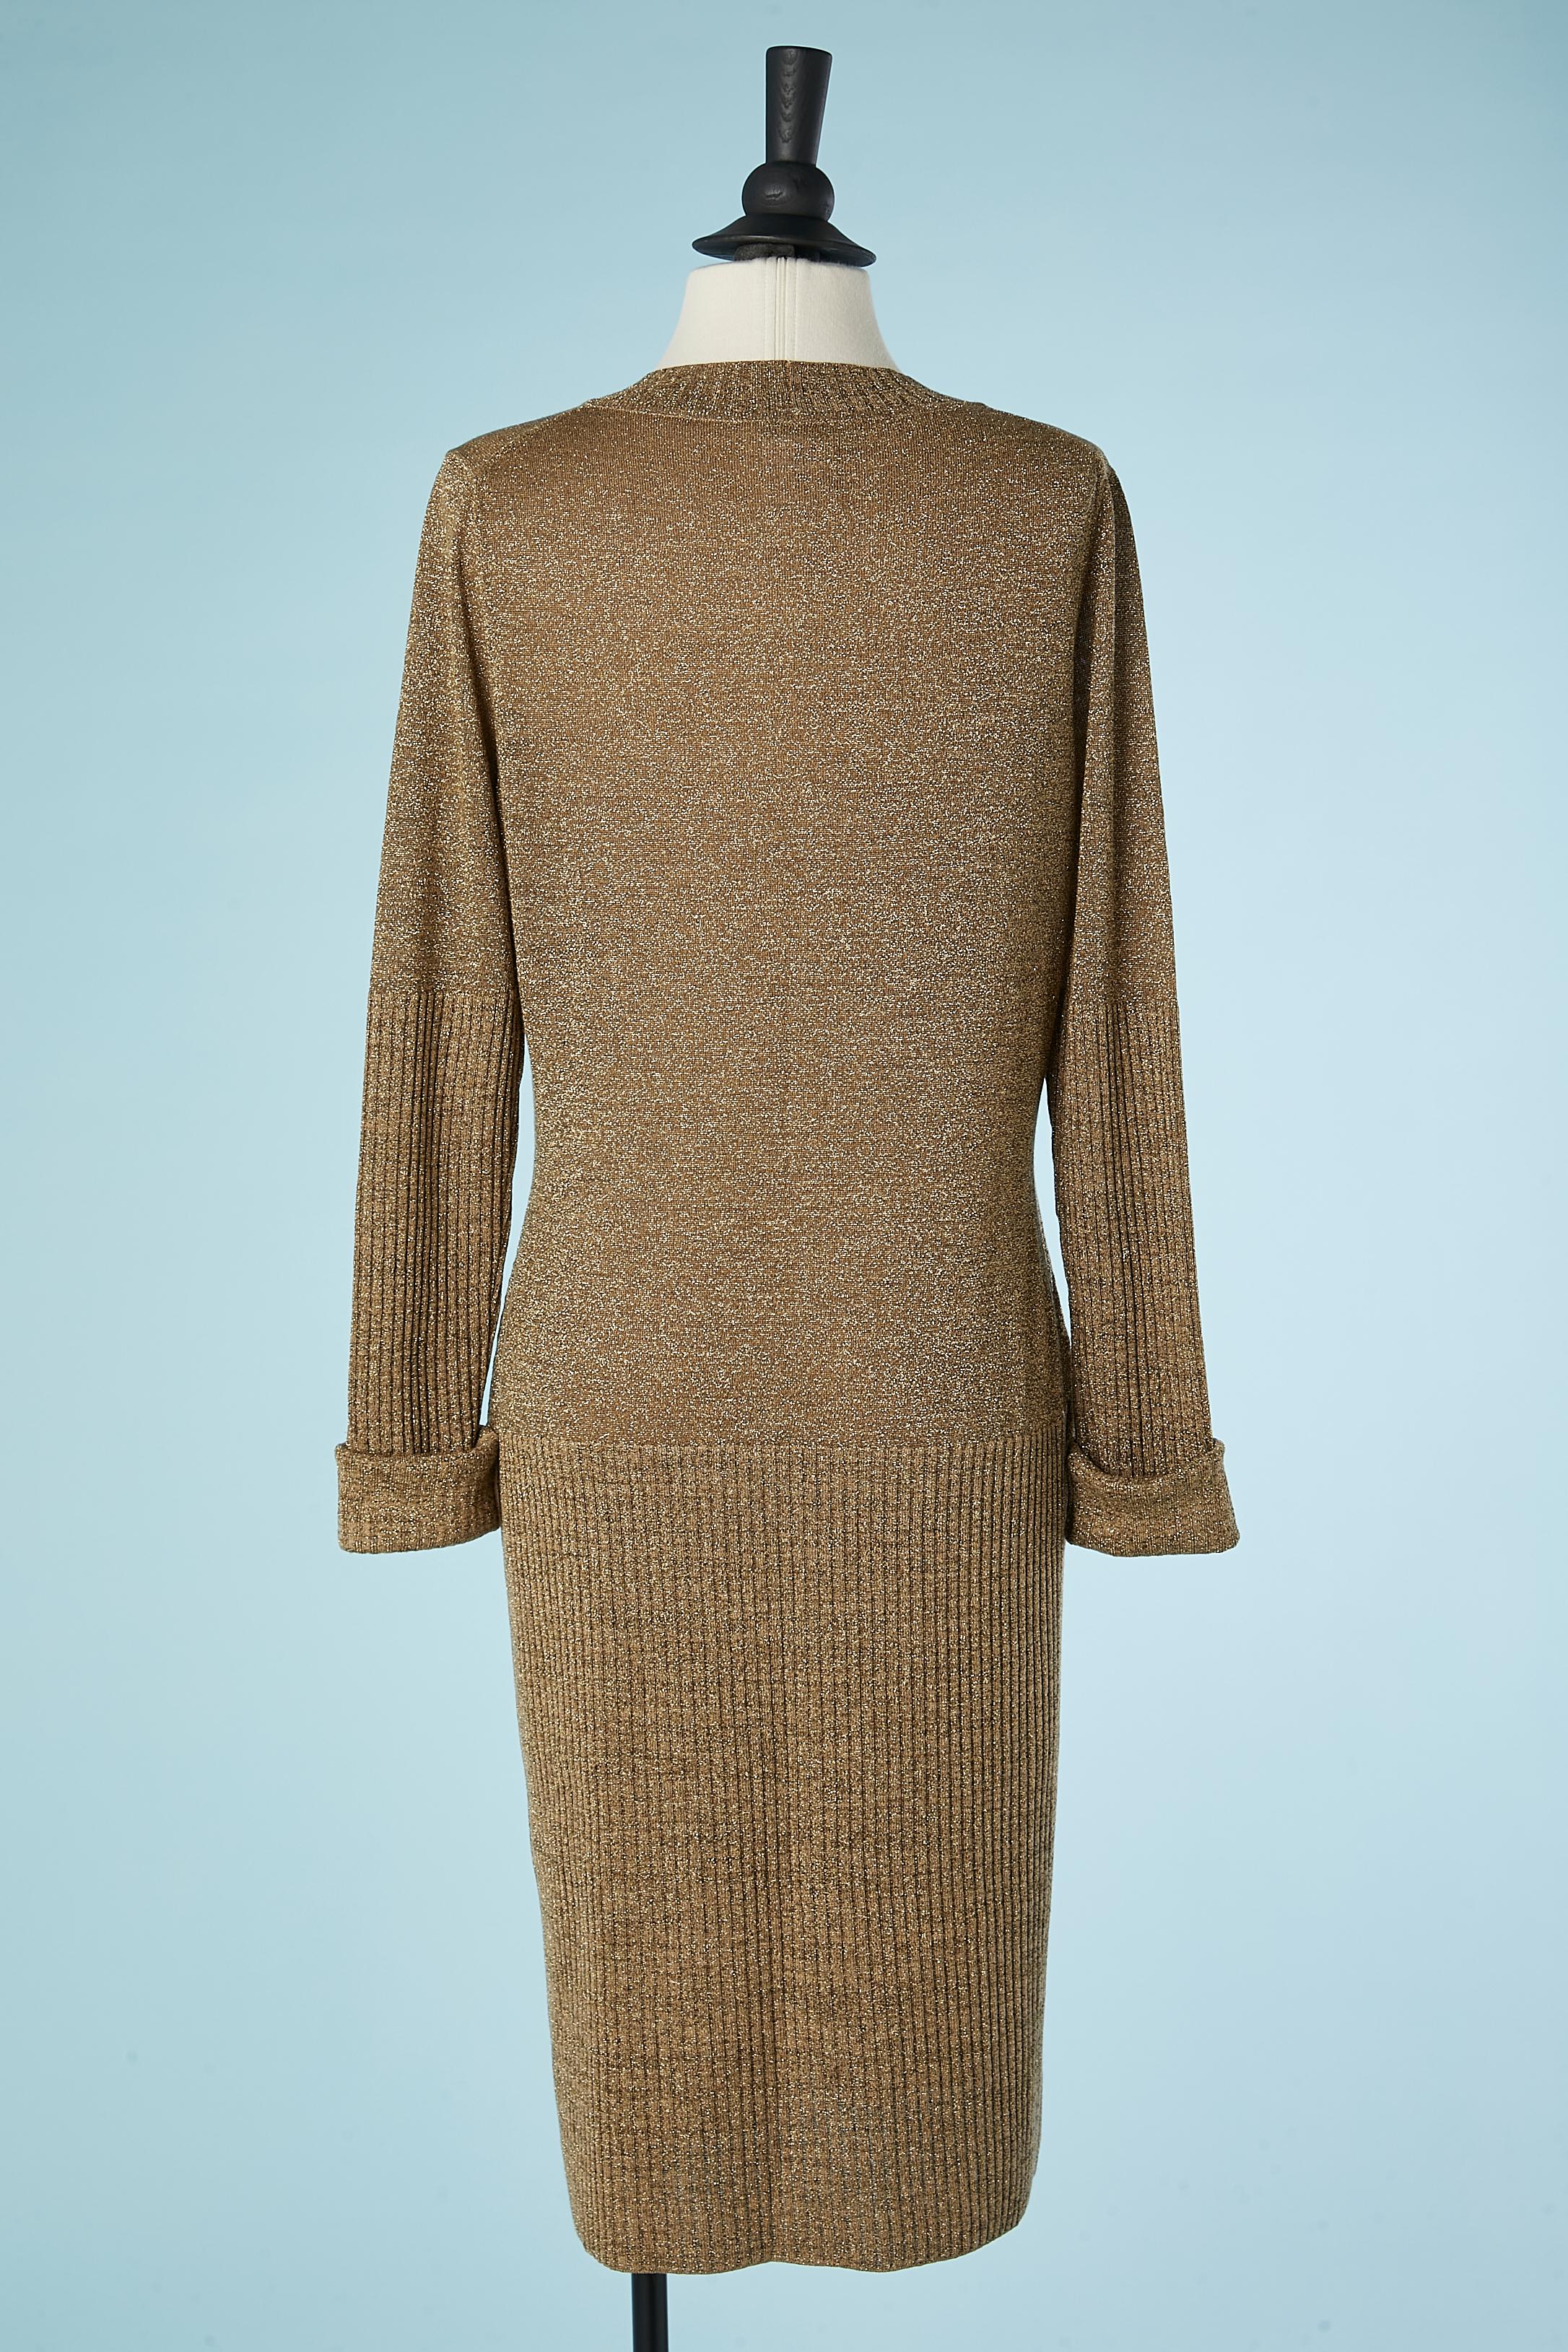 Gold lurex knit cocktail dress Chanel  For Sale 2